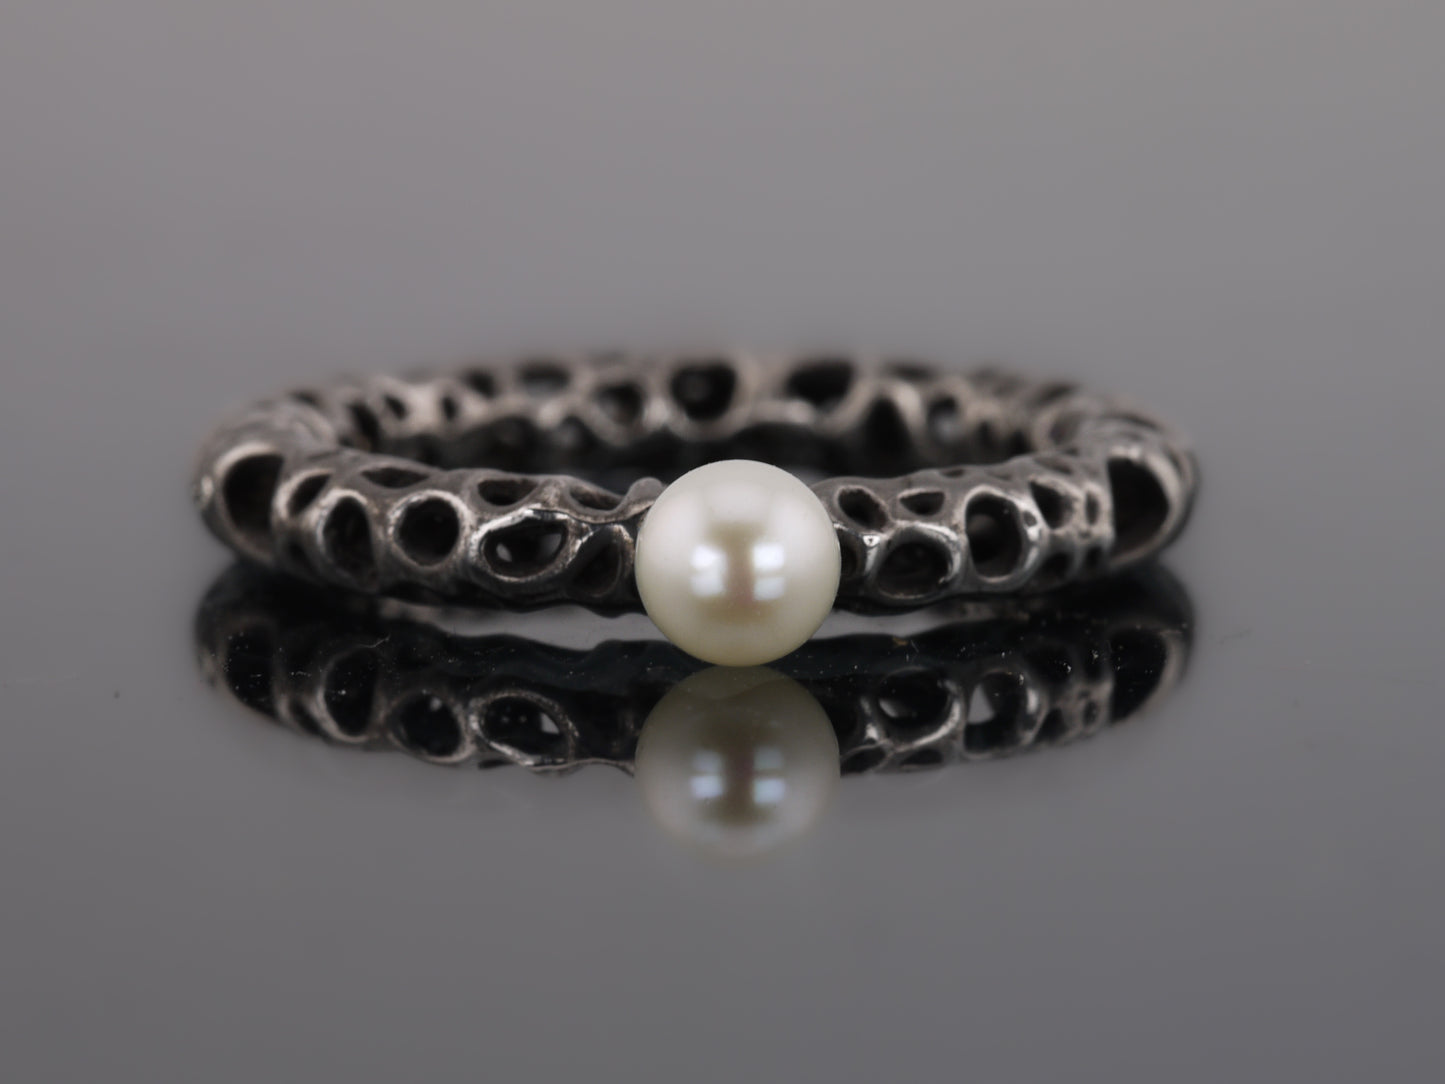 MALACOPIA Ring with Freshwater Pearl - Black Rhodium Plated